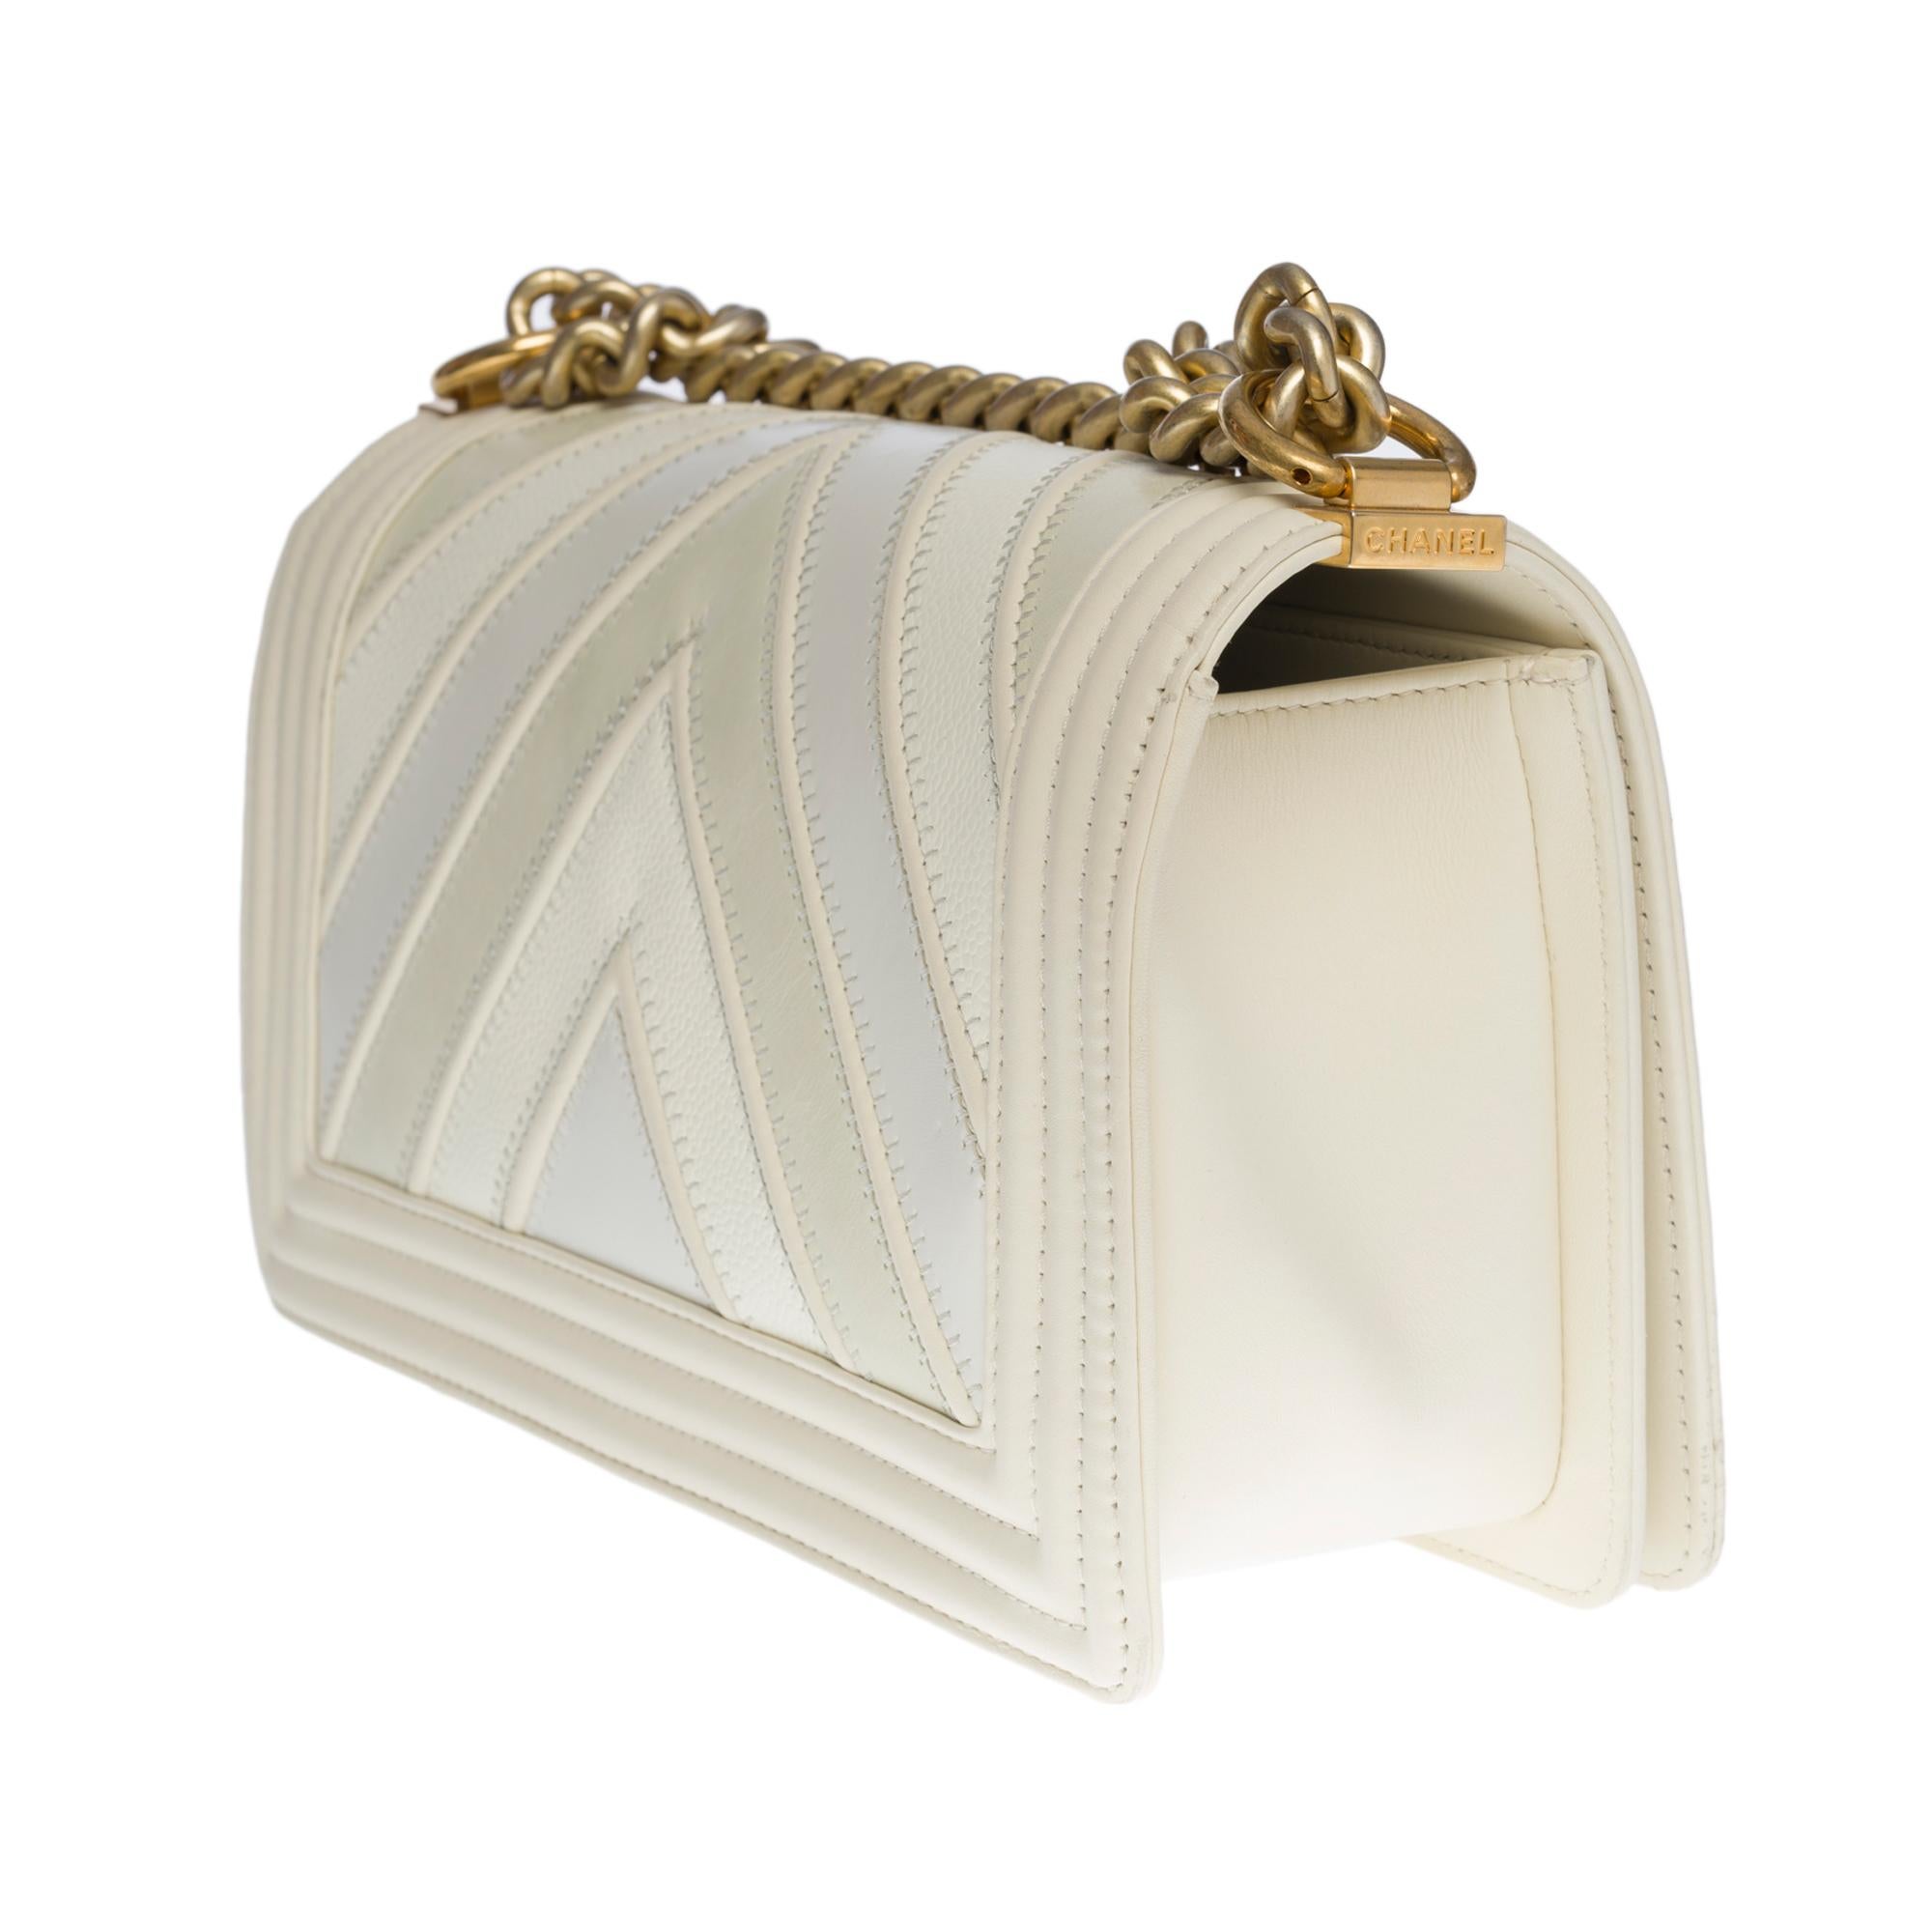 chanel boy bag white and gold